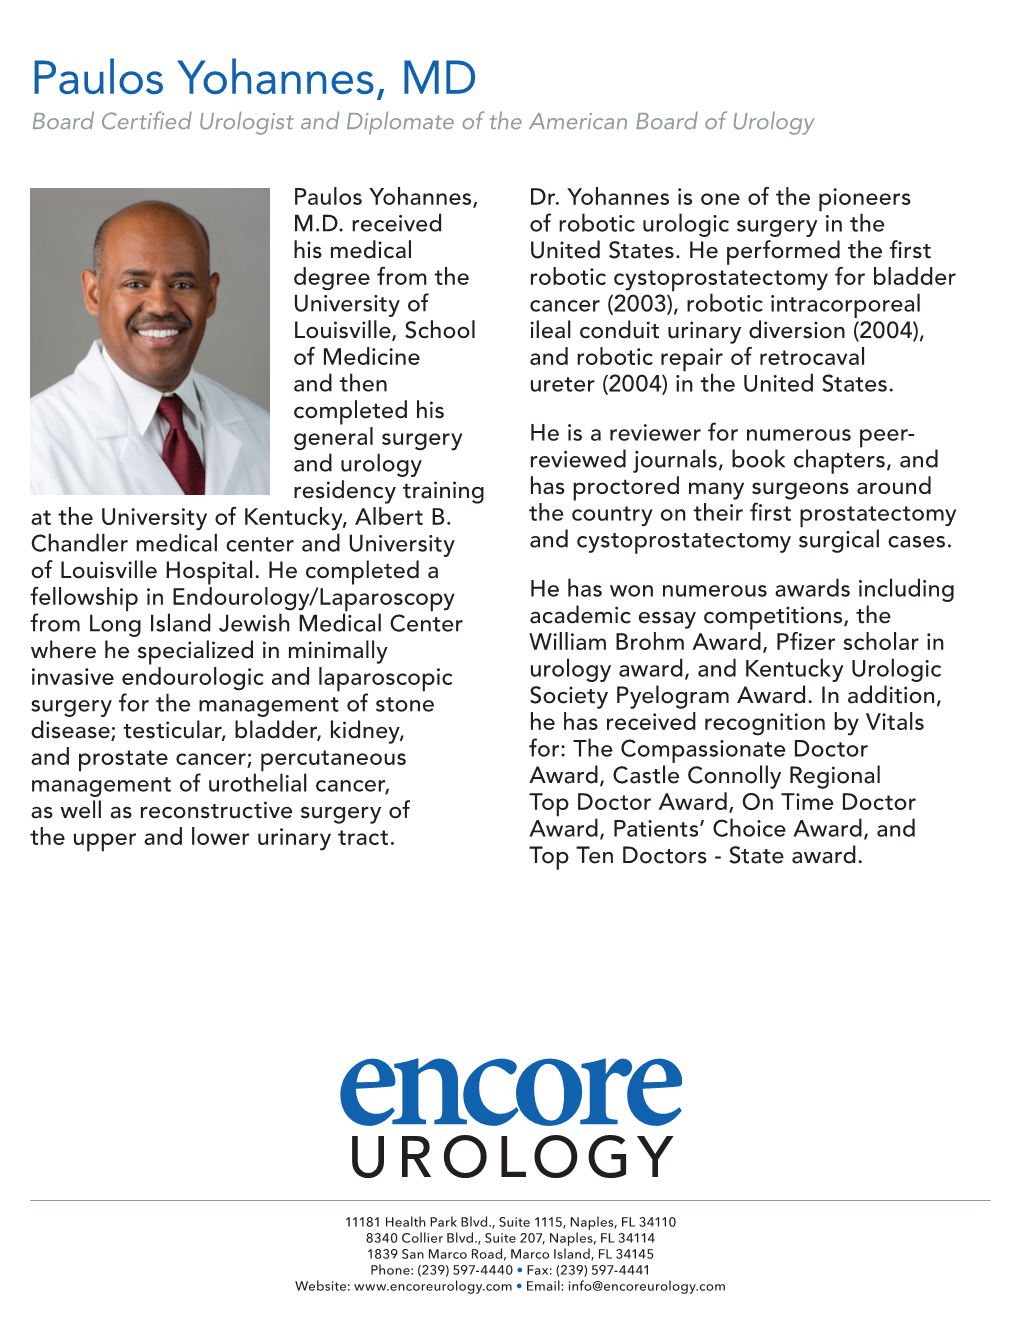 Paulos Yohannes, MD Board Certified Urologist and Diplomate of the American Board of Urology